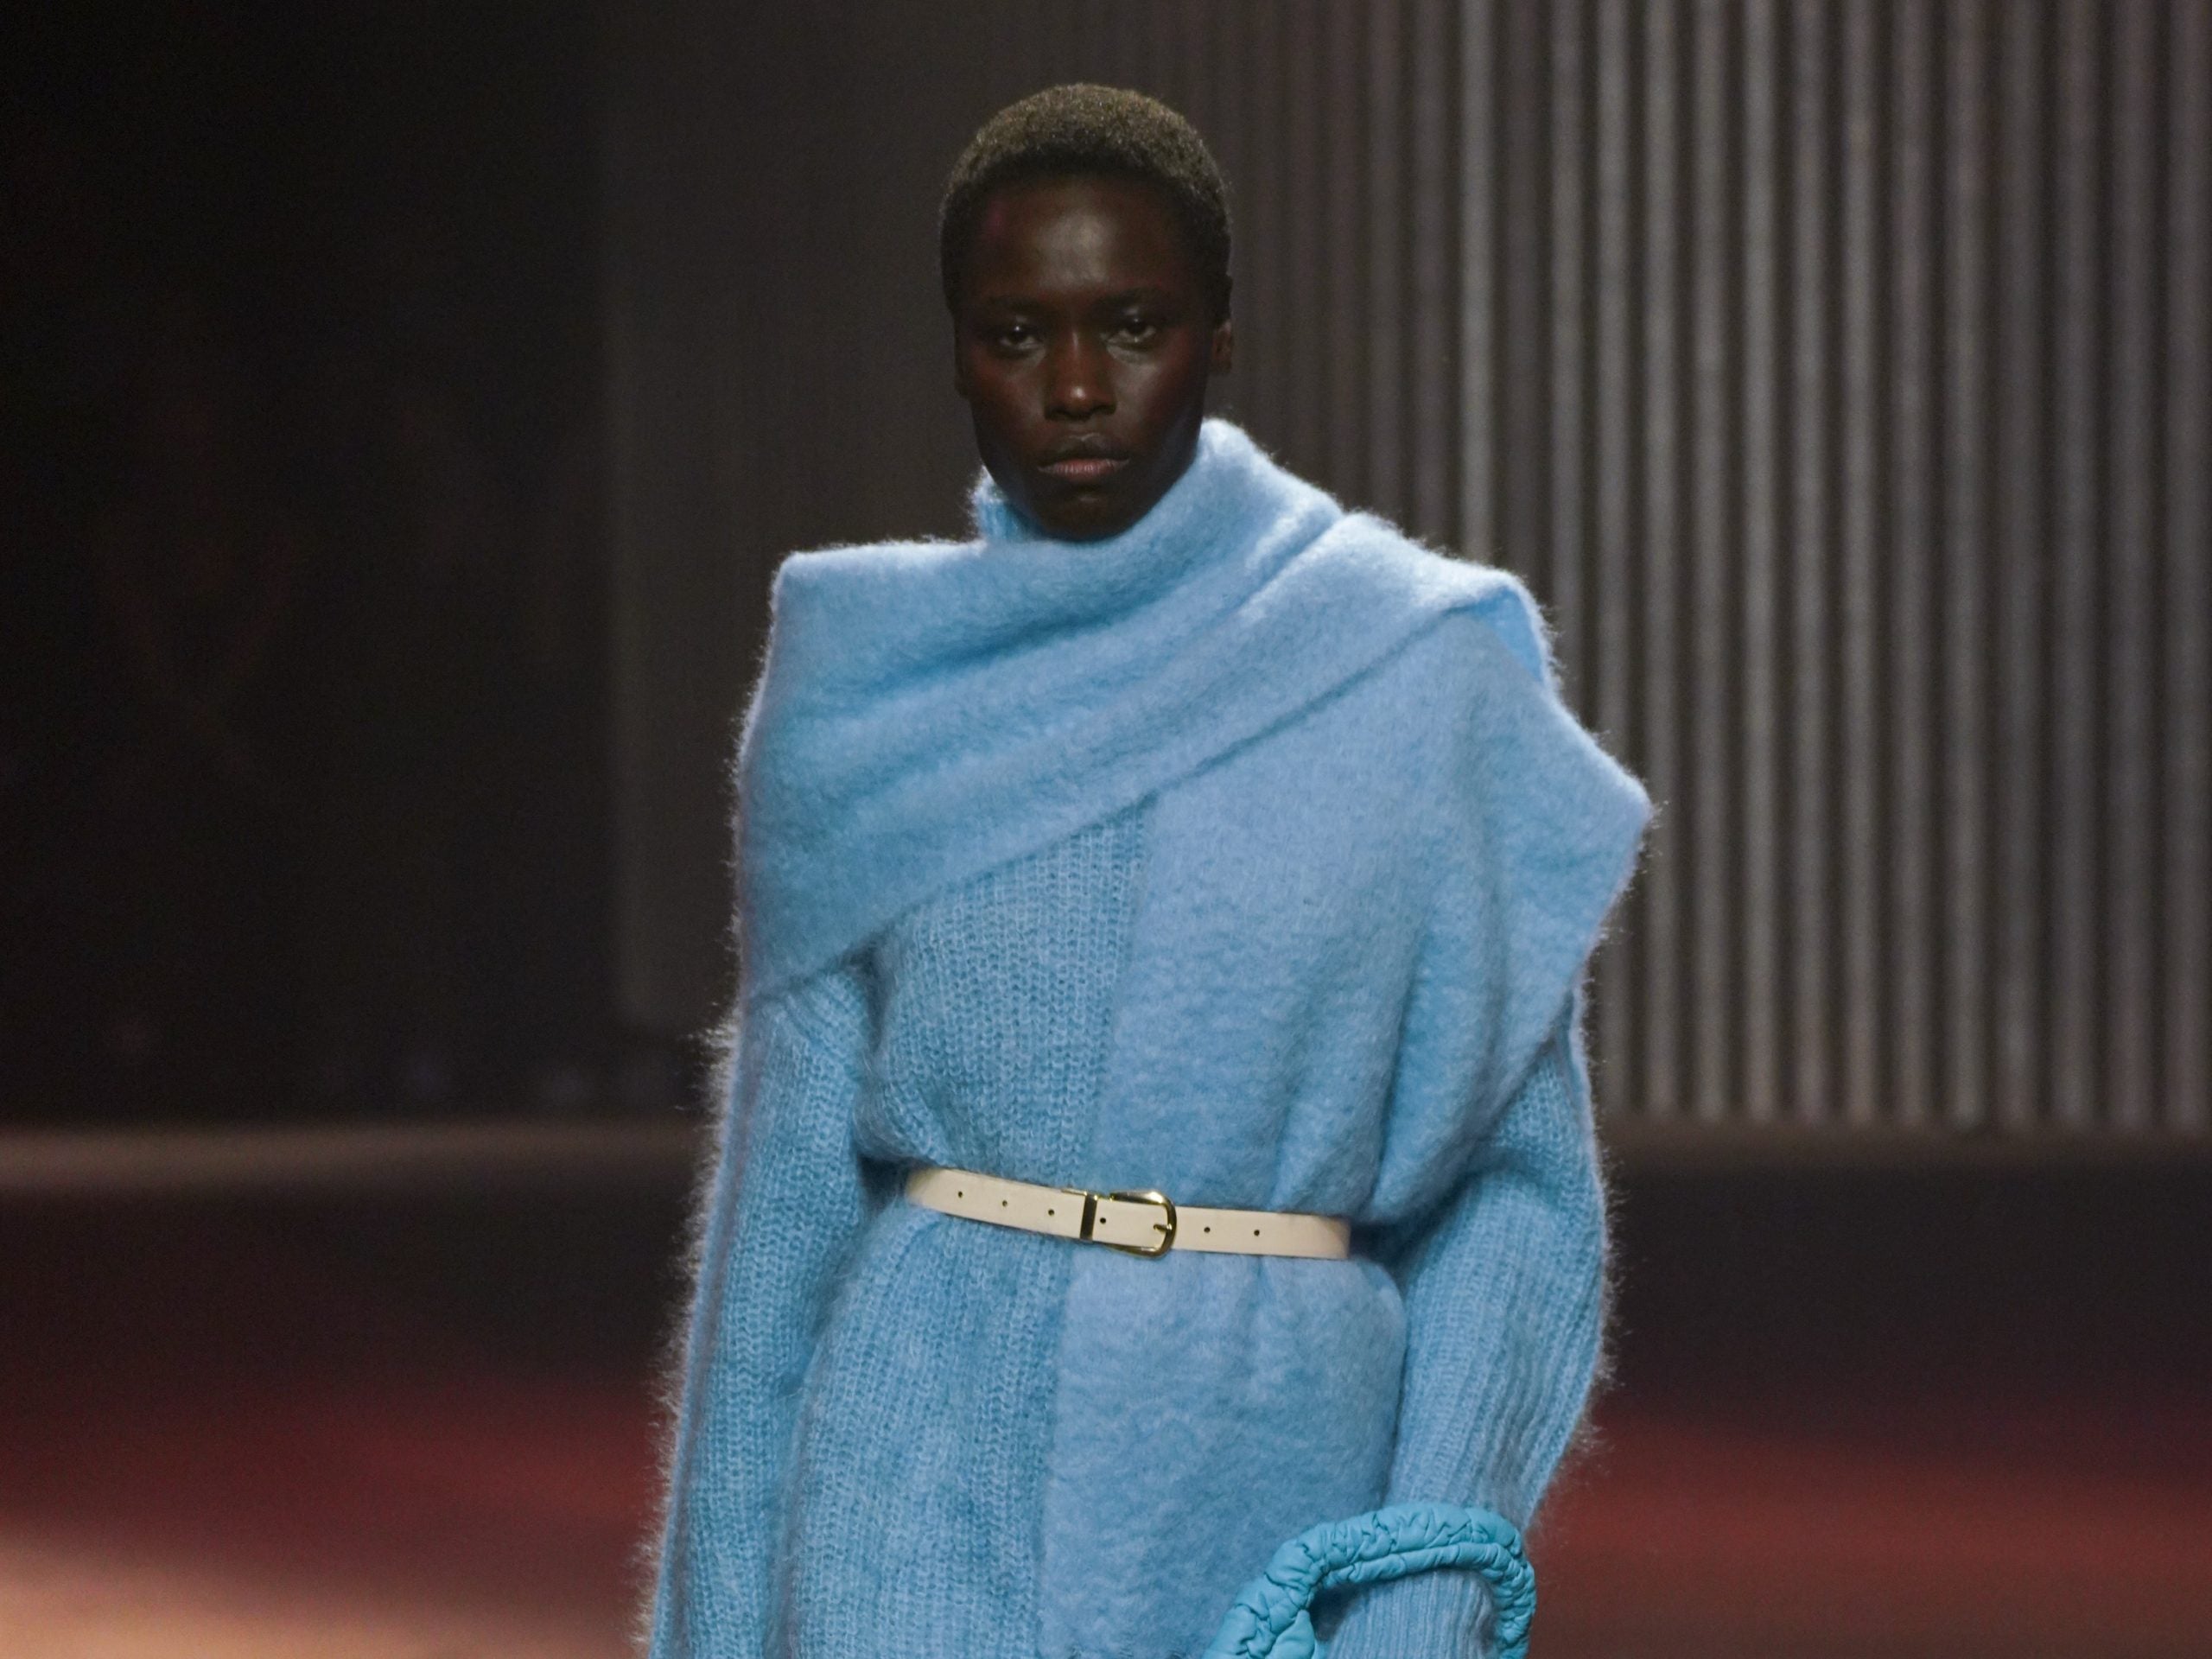 Fall/Winter 2023 Runway Looks Living In Our Head Rent Free